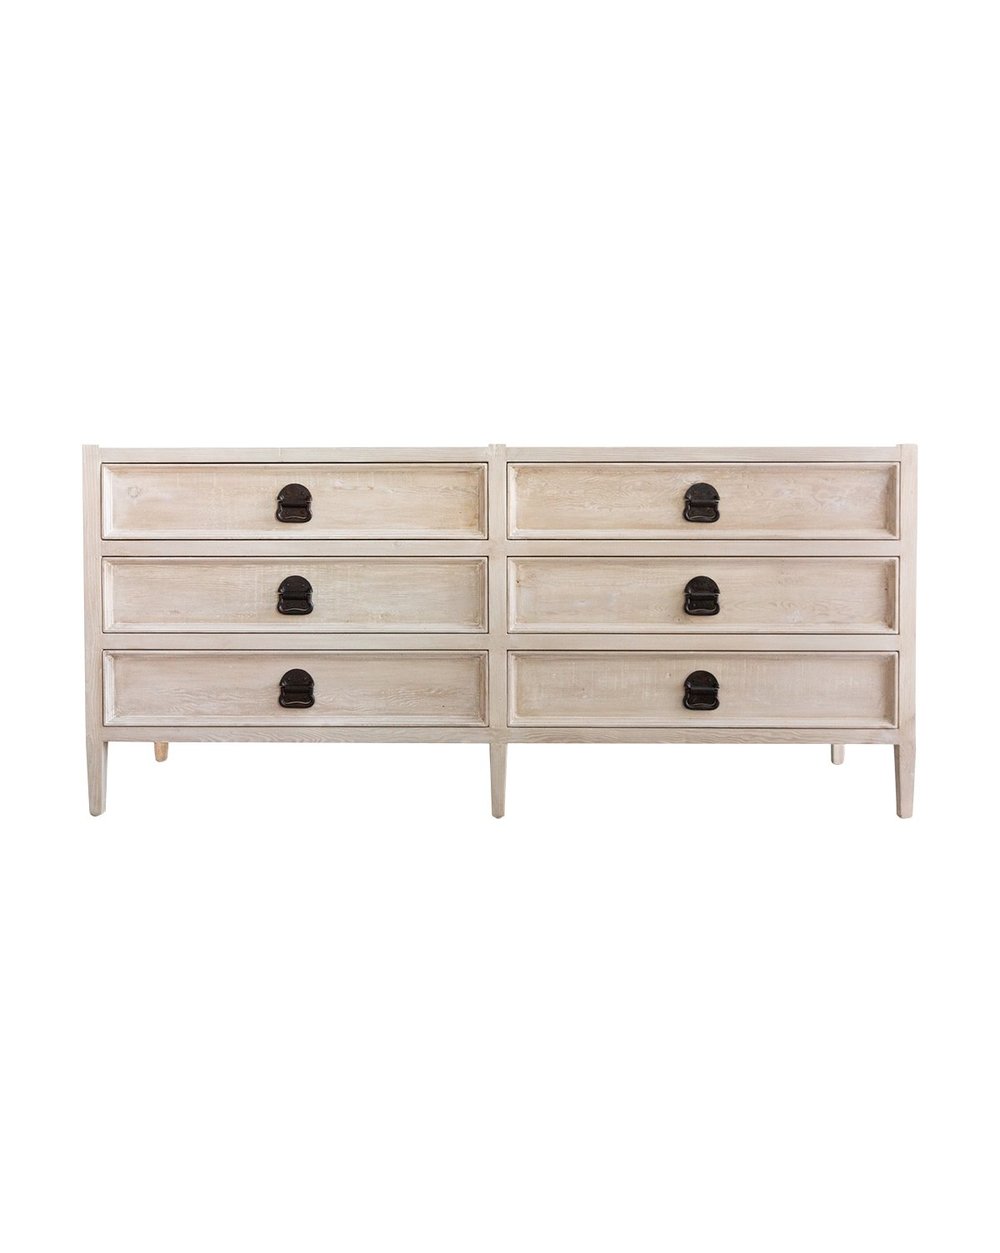 https://www.mcgeeandco.com/collections/dressers/products/lazlo-6-drawer-dresser?variant=36690932612